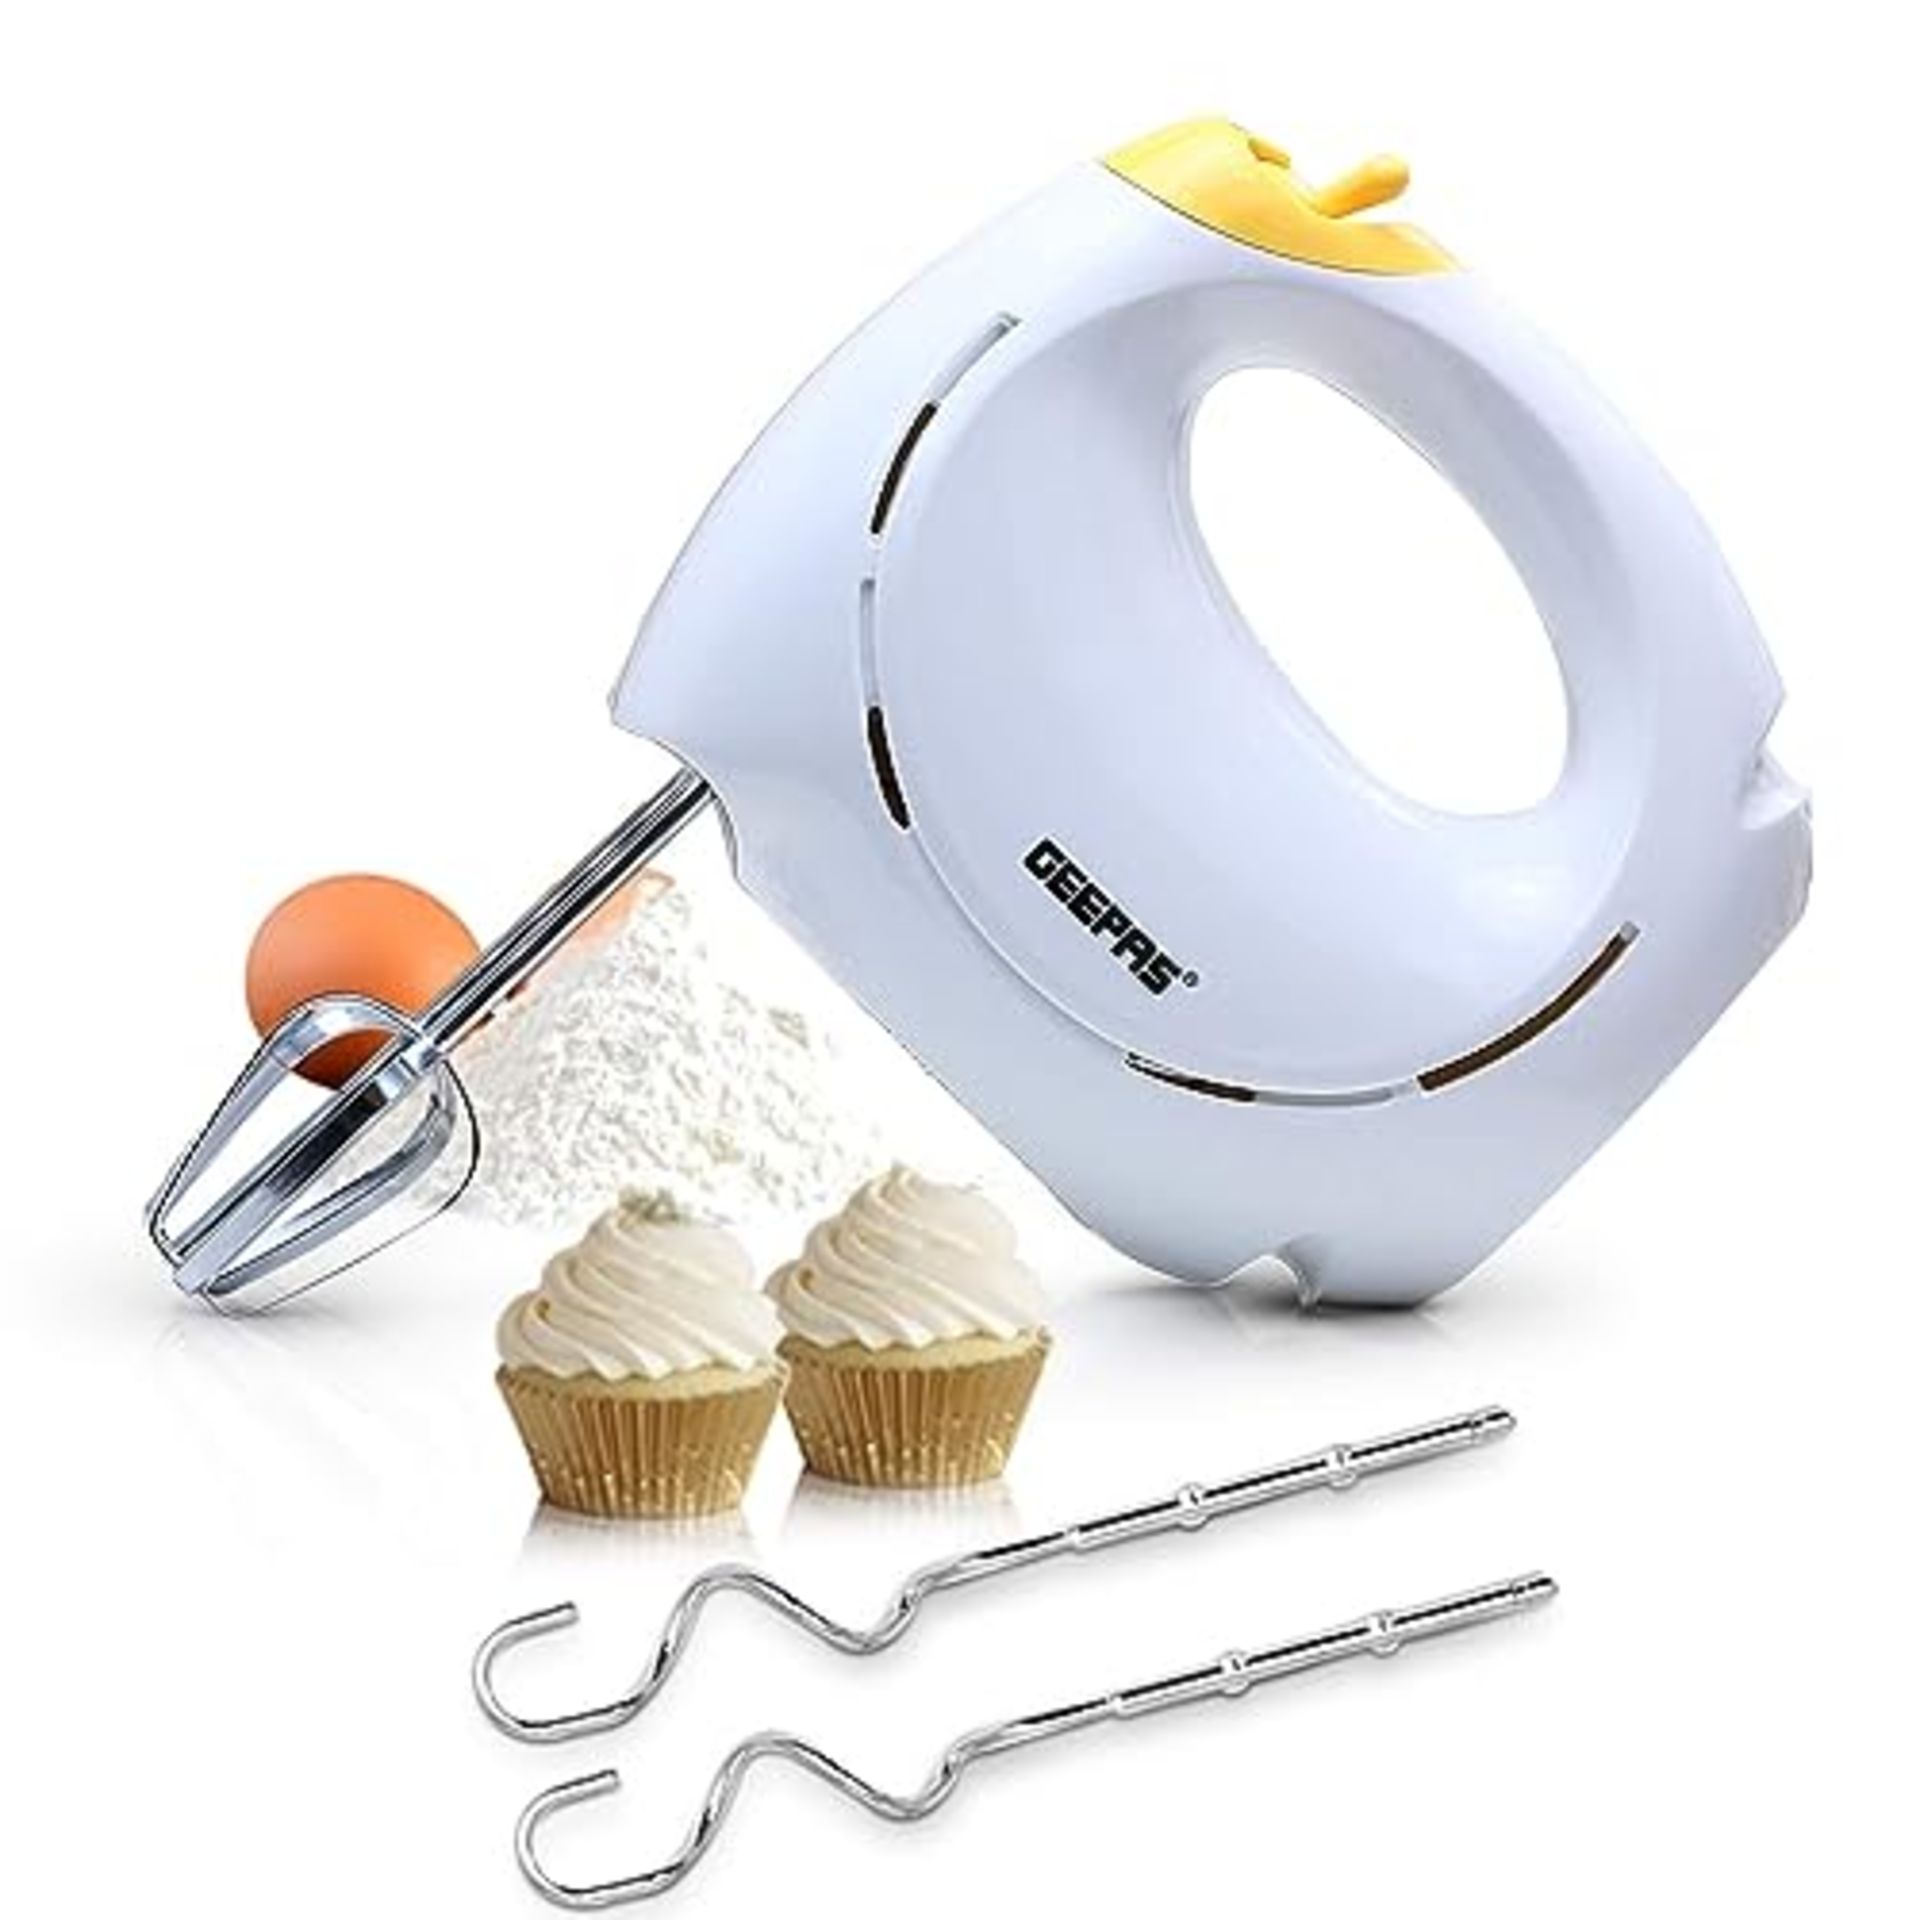 Geepas 150W Hand Mixer - Electric Whisk, Handheld Food Collection Cake Mixer for Bakin